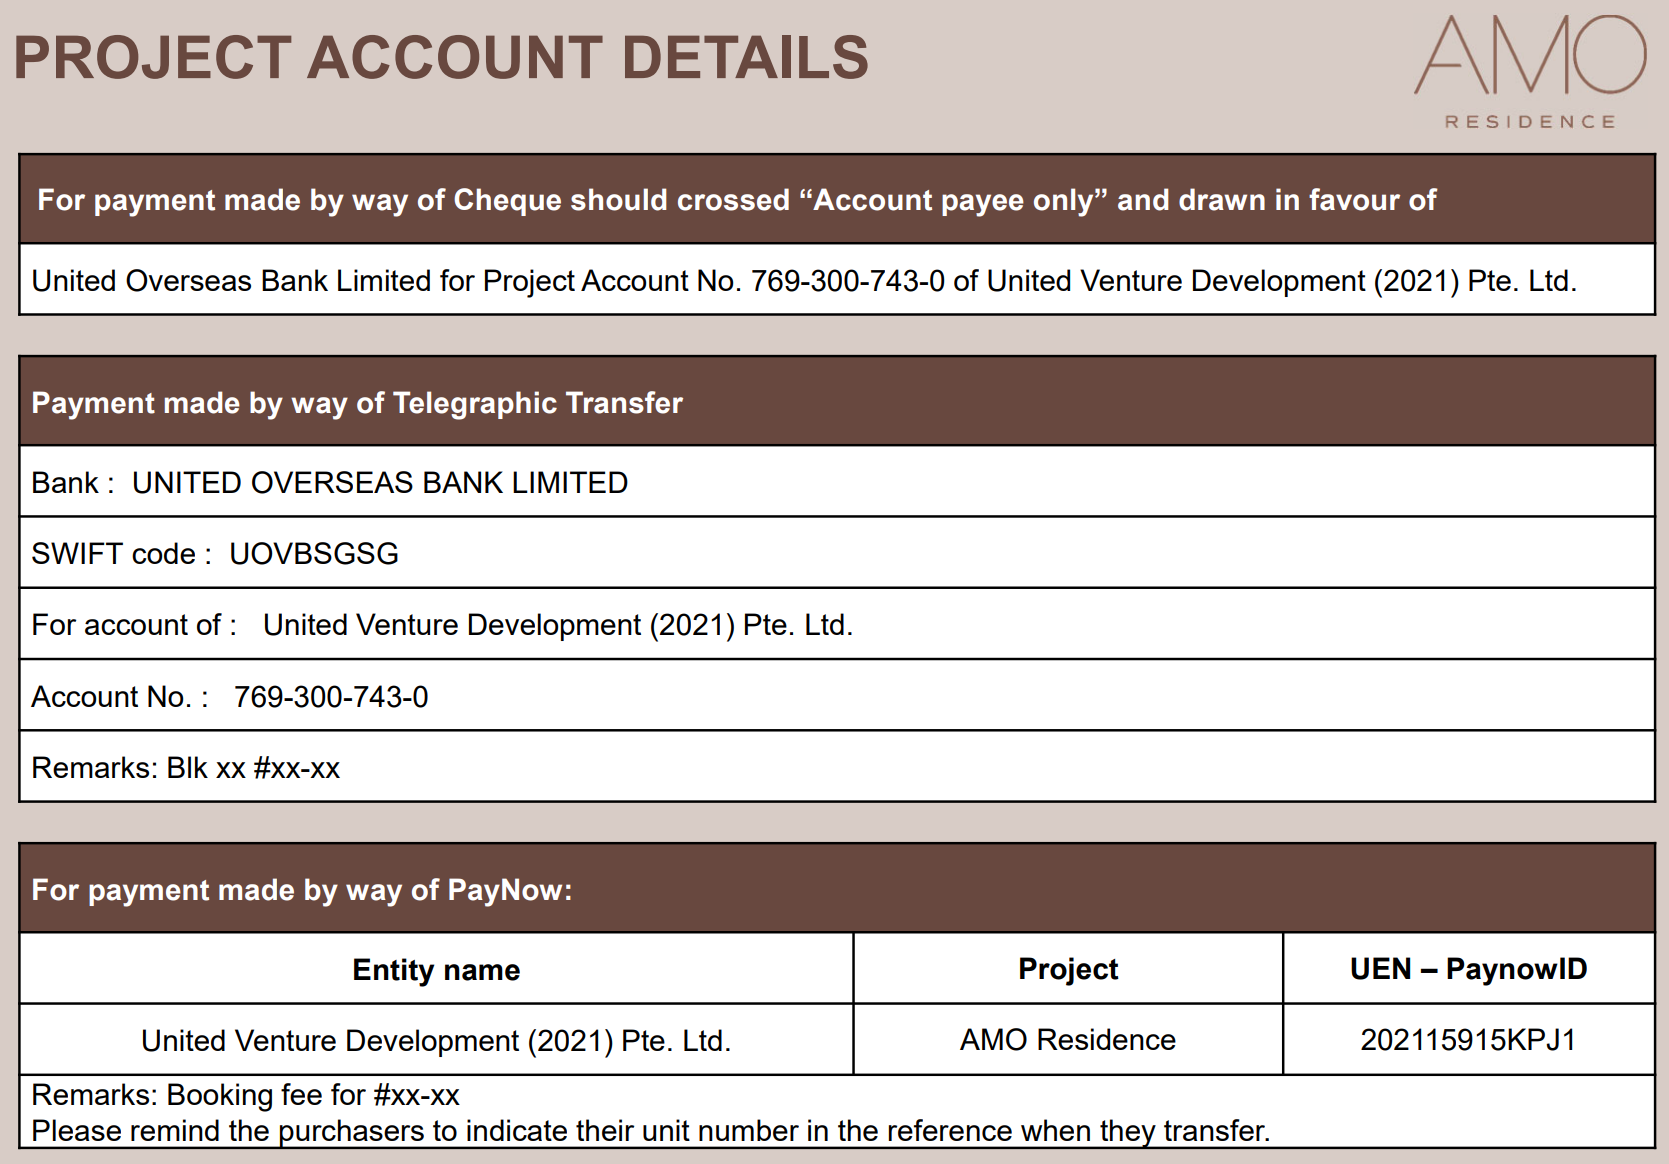 AMO Residence Project Account Details_090622